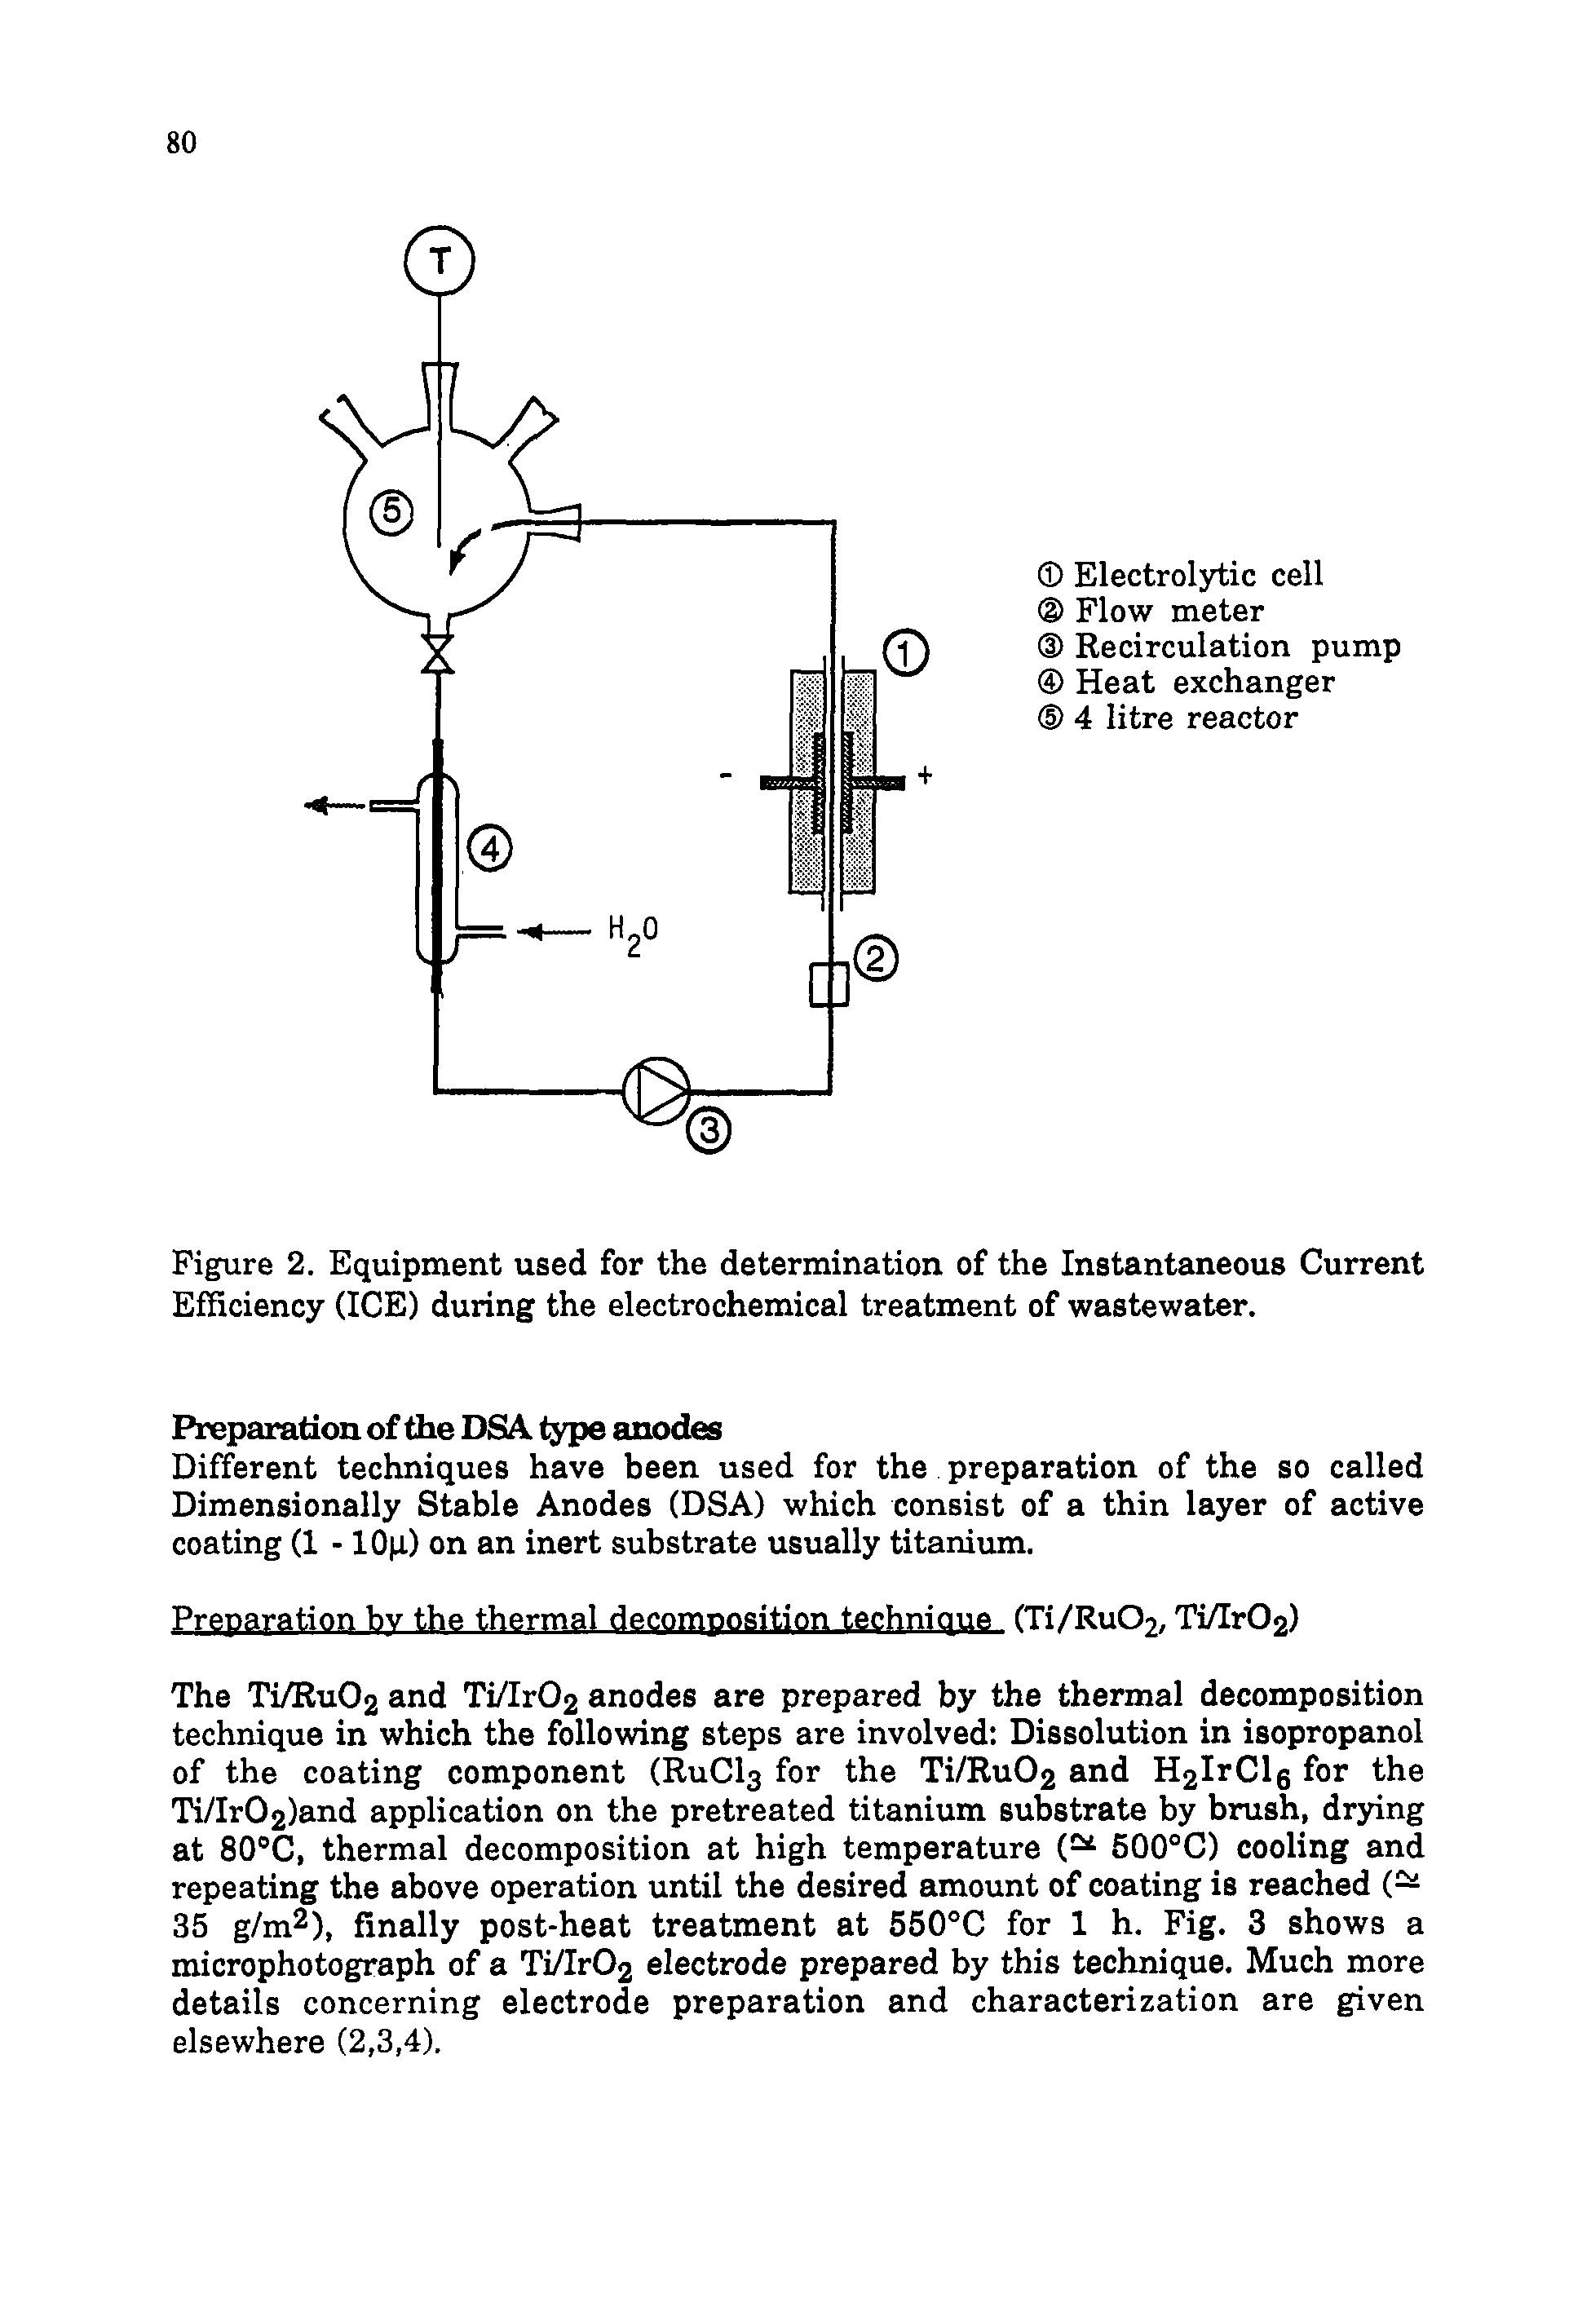 Figure 2. Equipment used for the determination of the Instantaneous Current Efficiency (ICE) during the electrochemical treatment of wastewater.